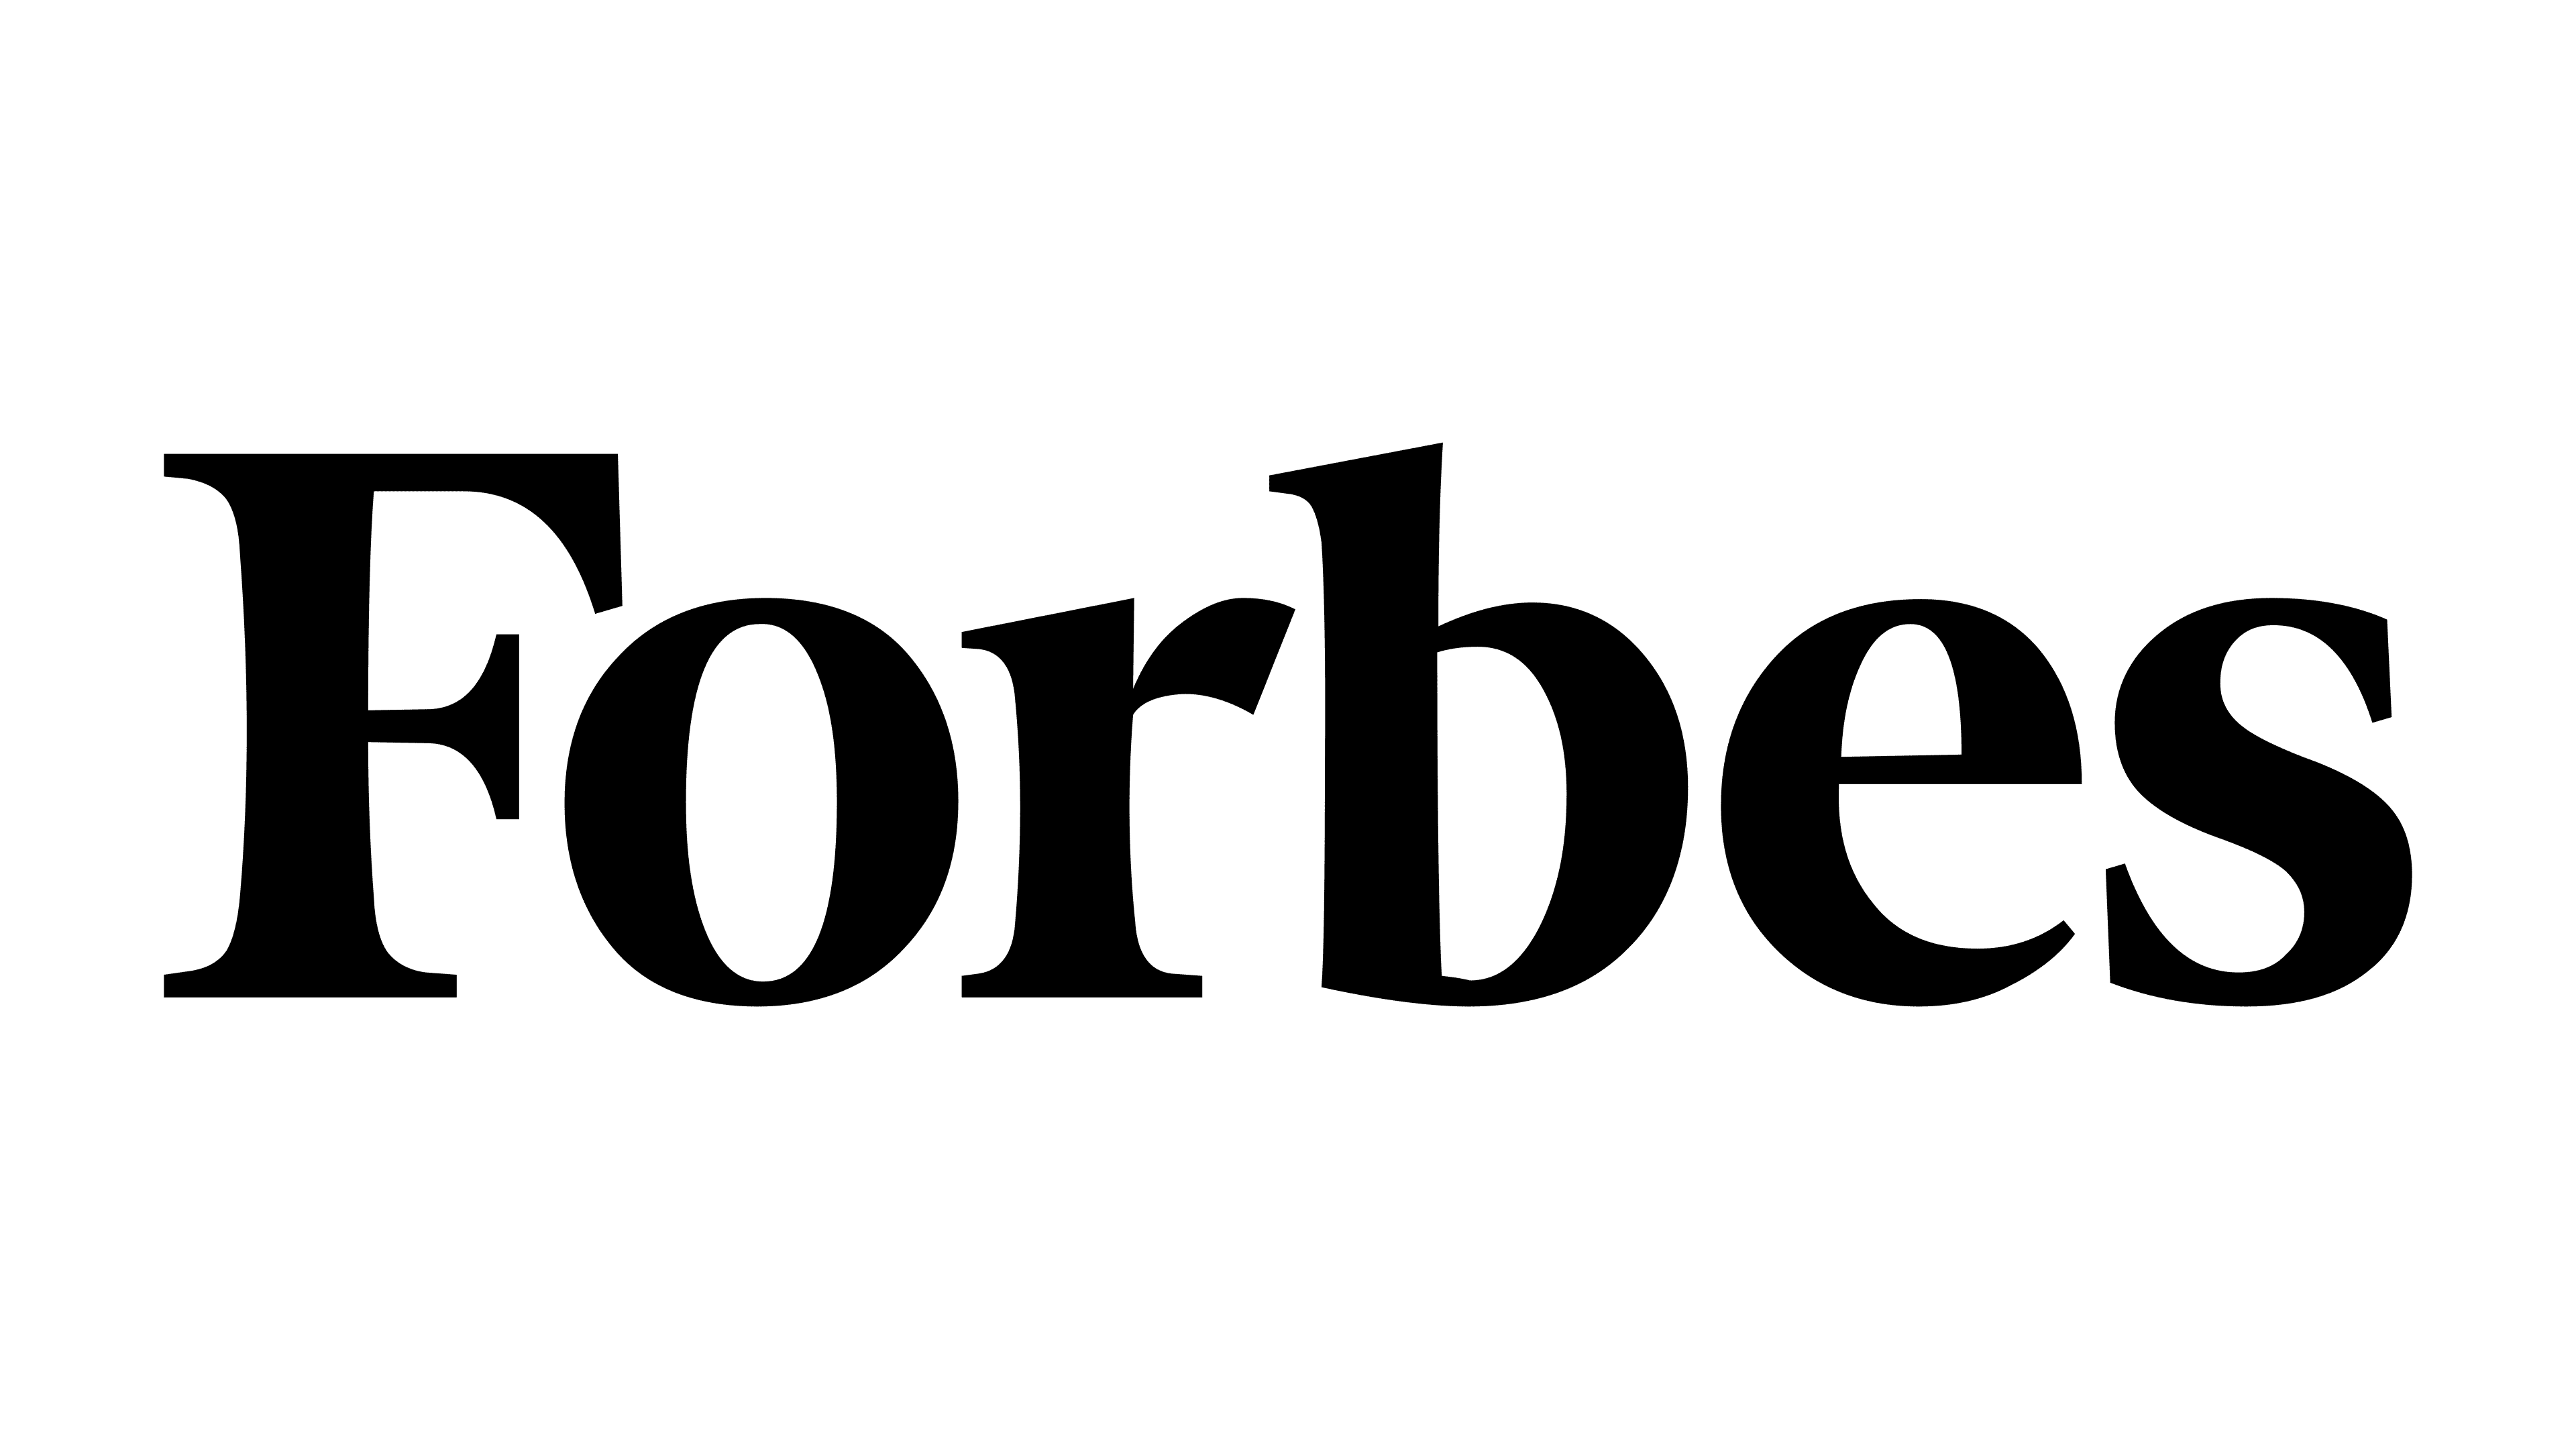 Forbes features Edna Martinson